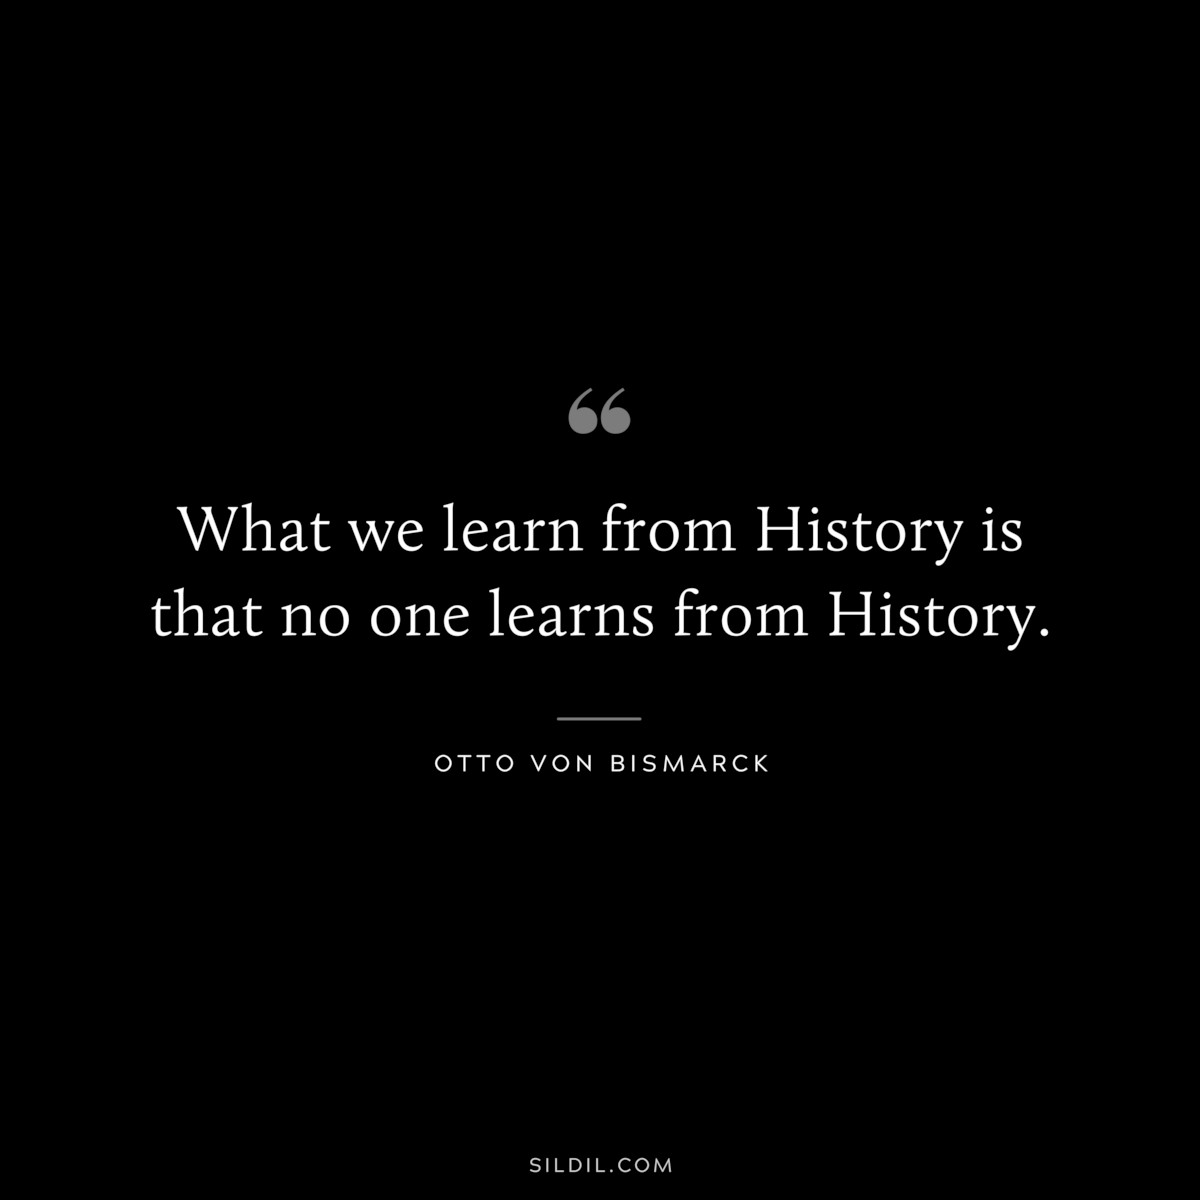 What we learn from History is that no one learns from History. ― Otto von Bismarck